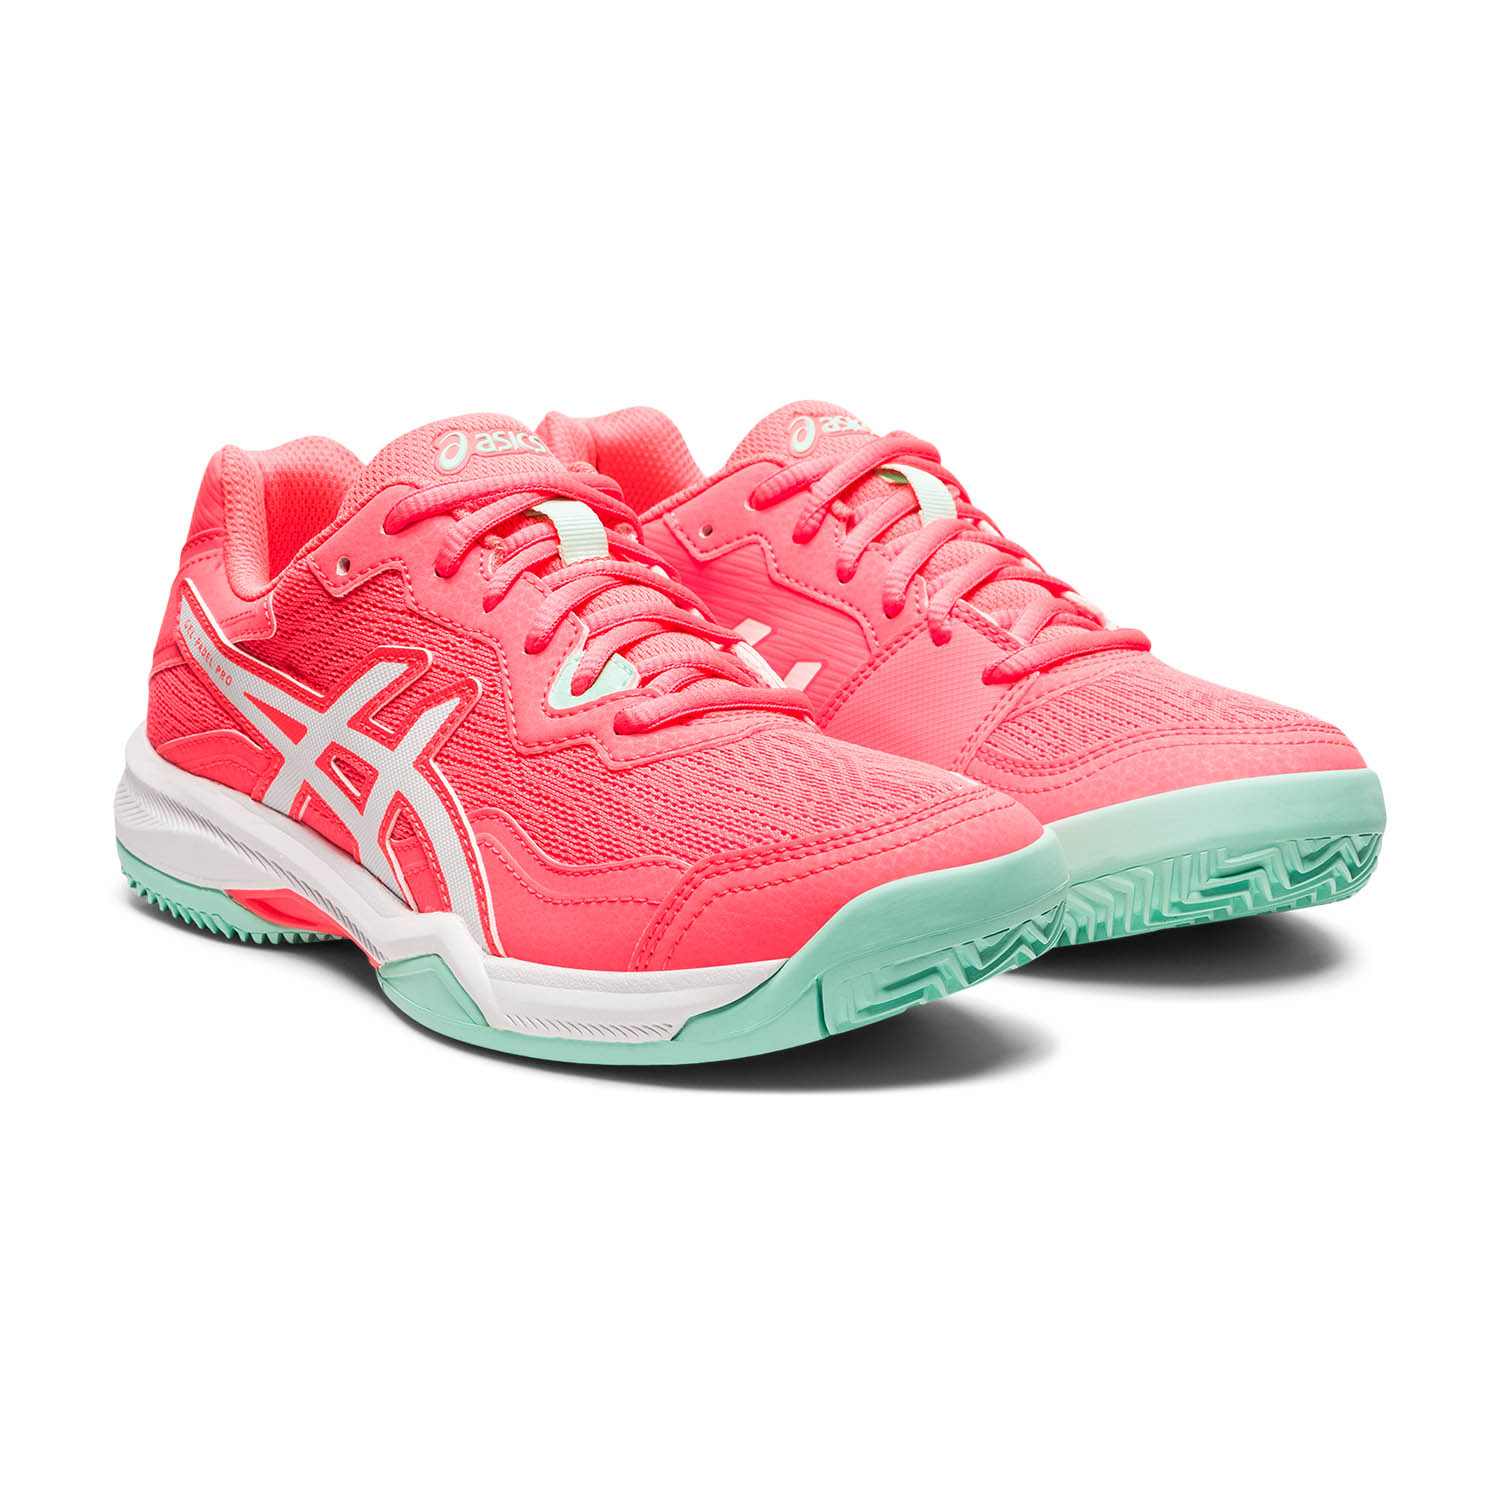 asics coral bay trainer